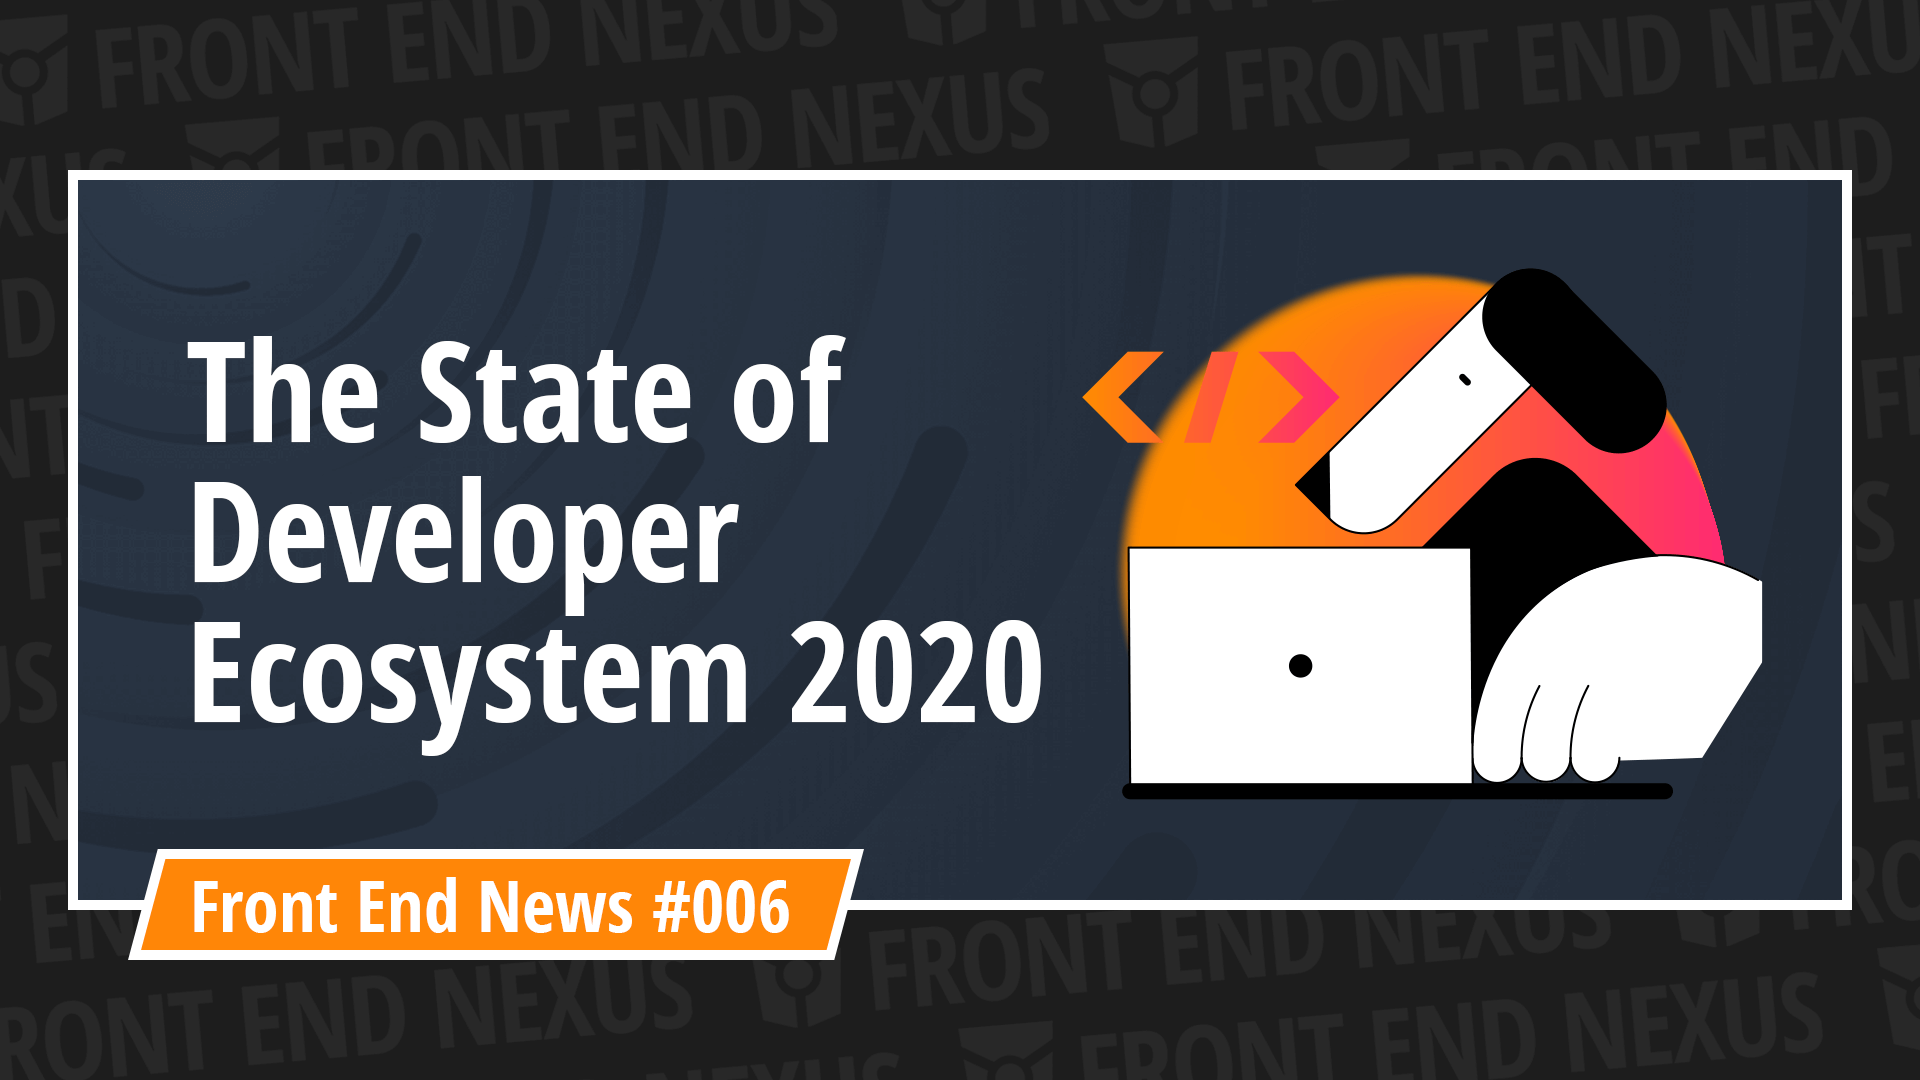 State of Developer Ecosystem in 2020 and Native CSS Masonry Explained | Front End News #006